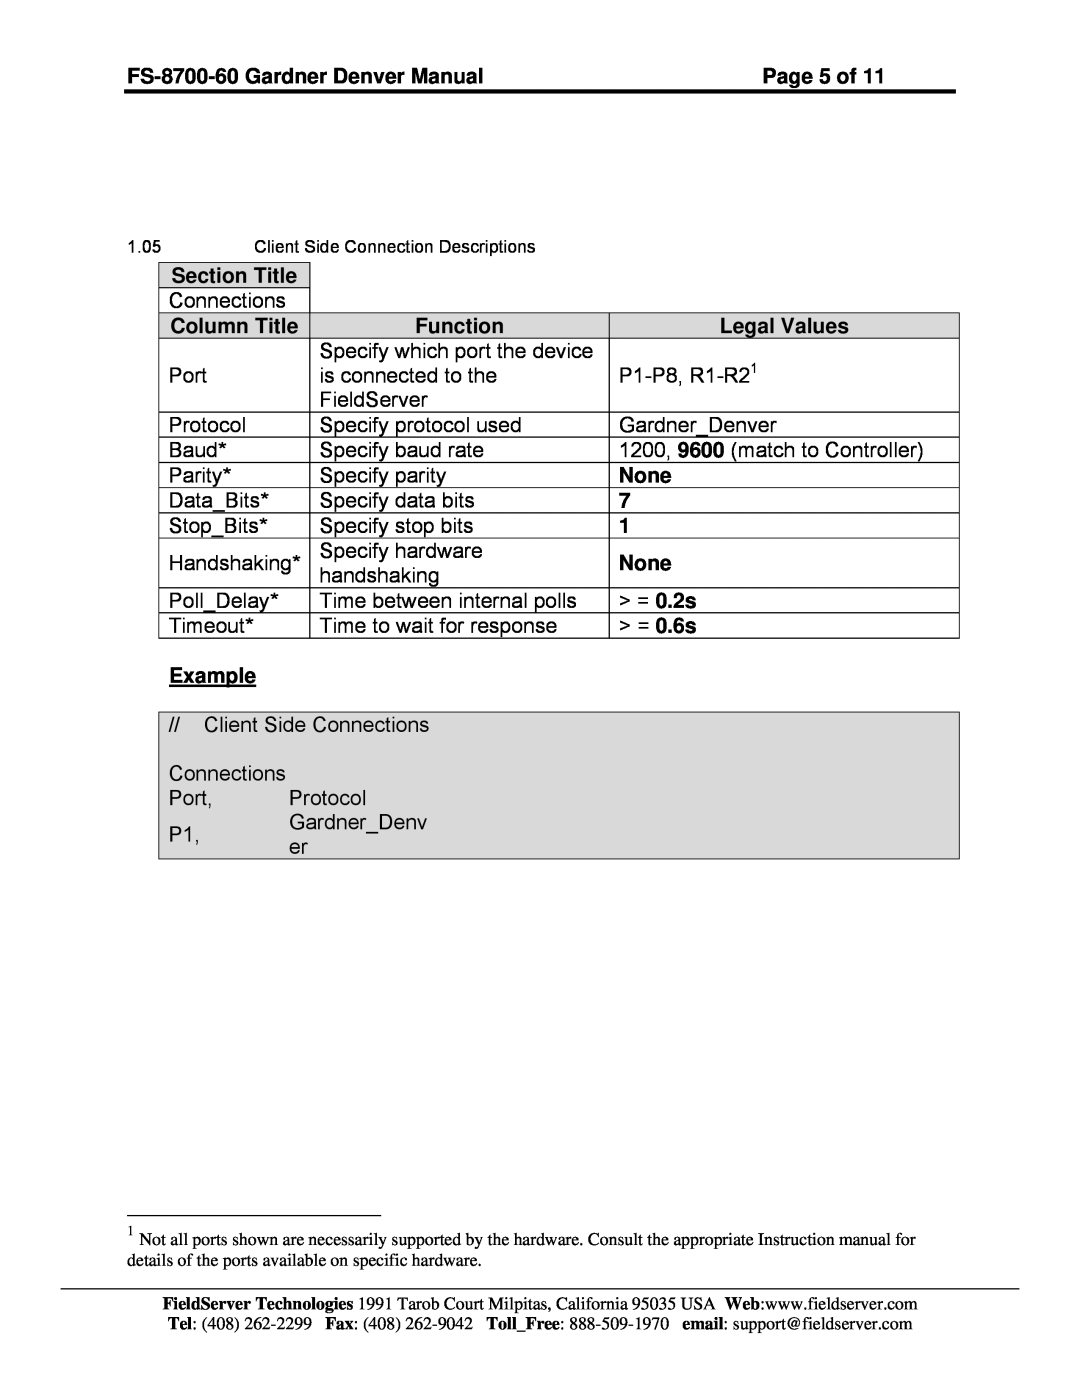 FieldServer Page 5 of, None, FS-8700-60 Gardner Denver Manual, Section Title, Column Title, Function, Legal Values 